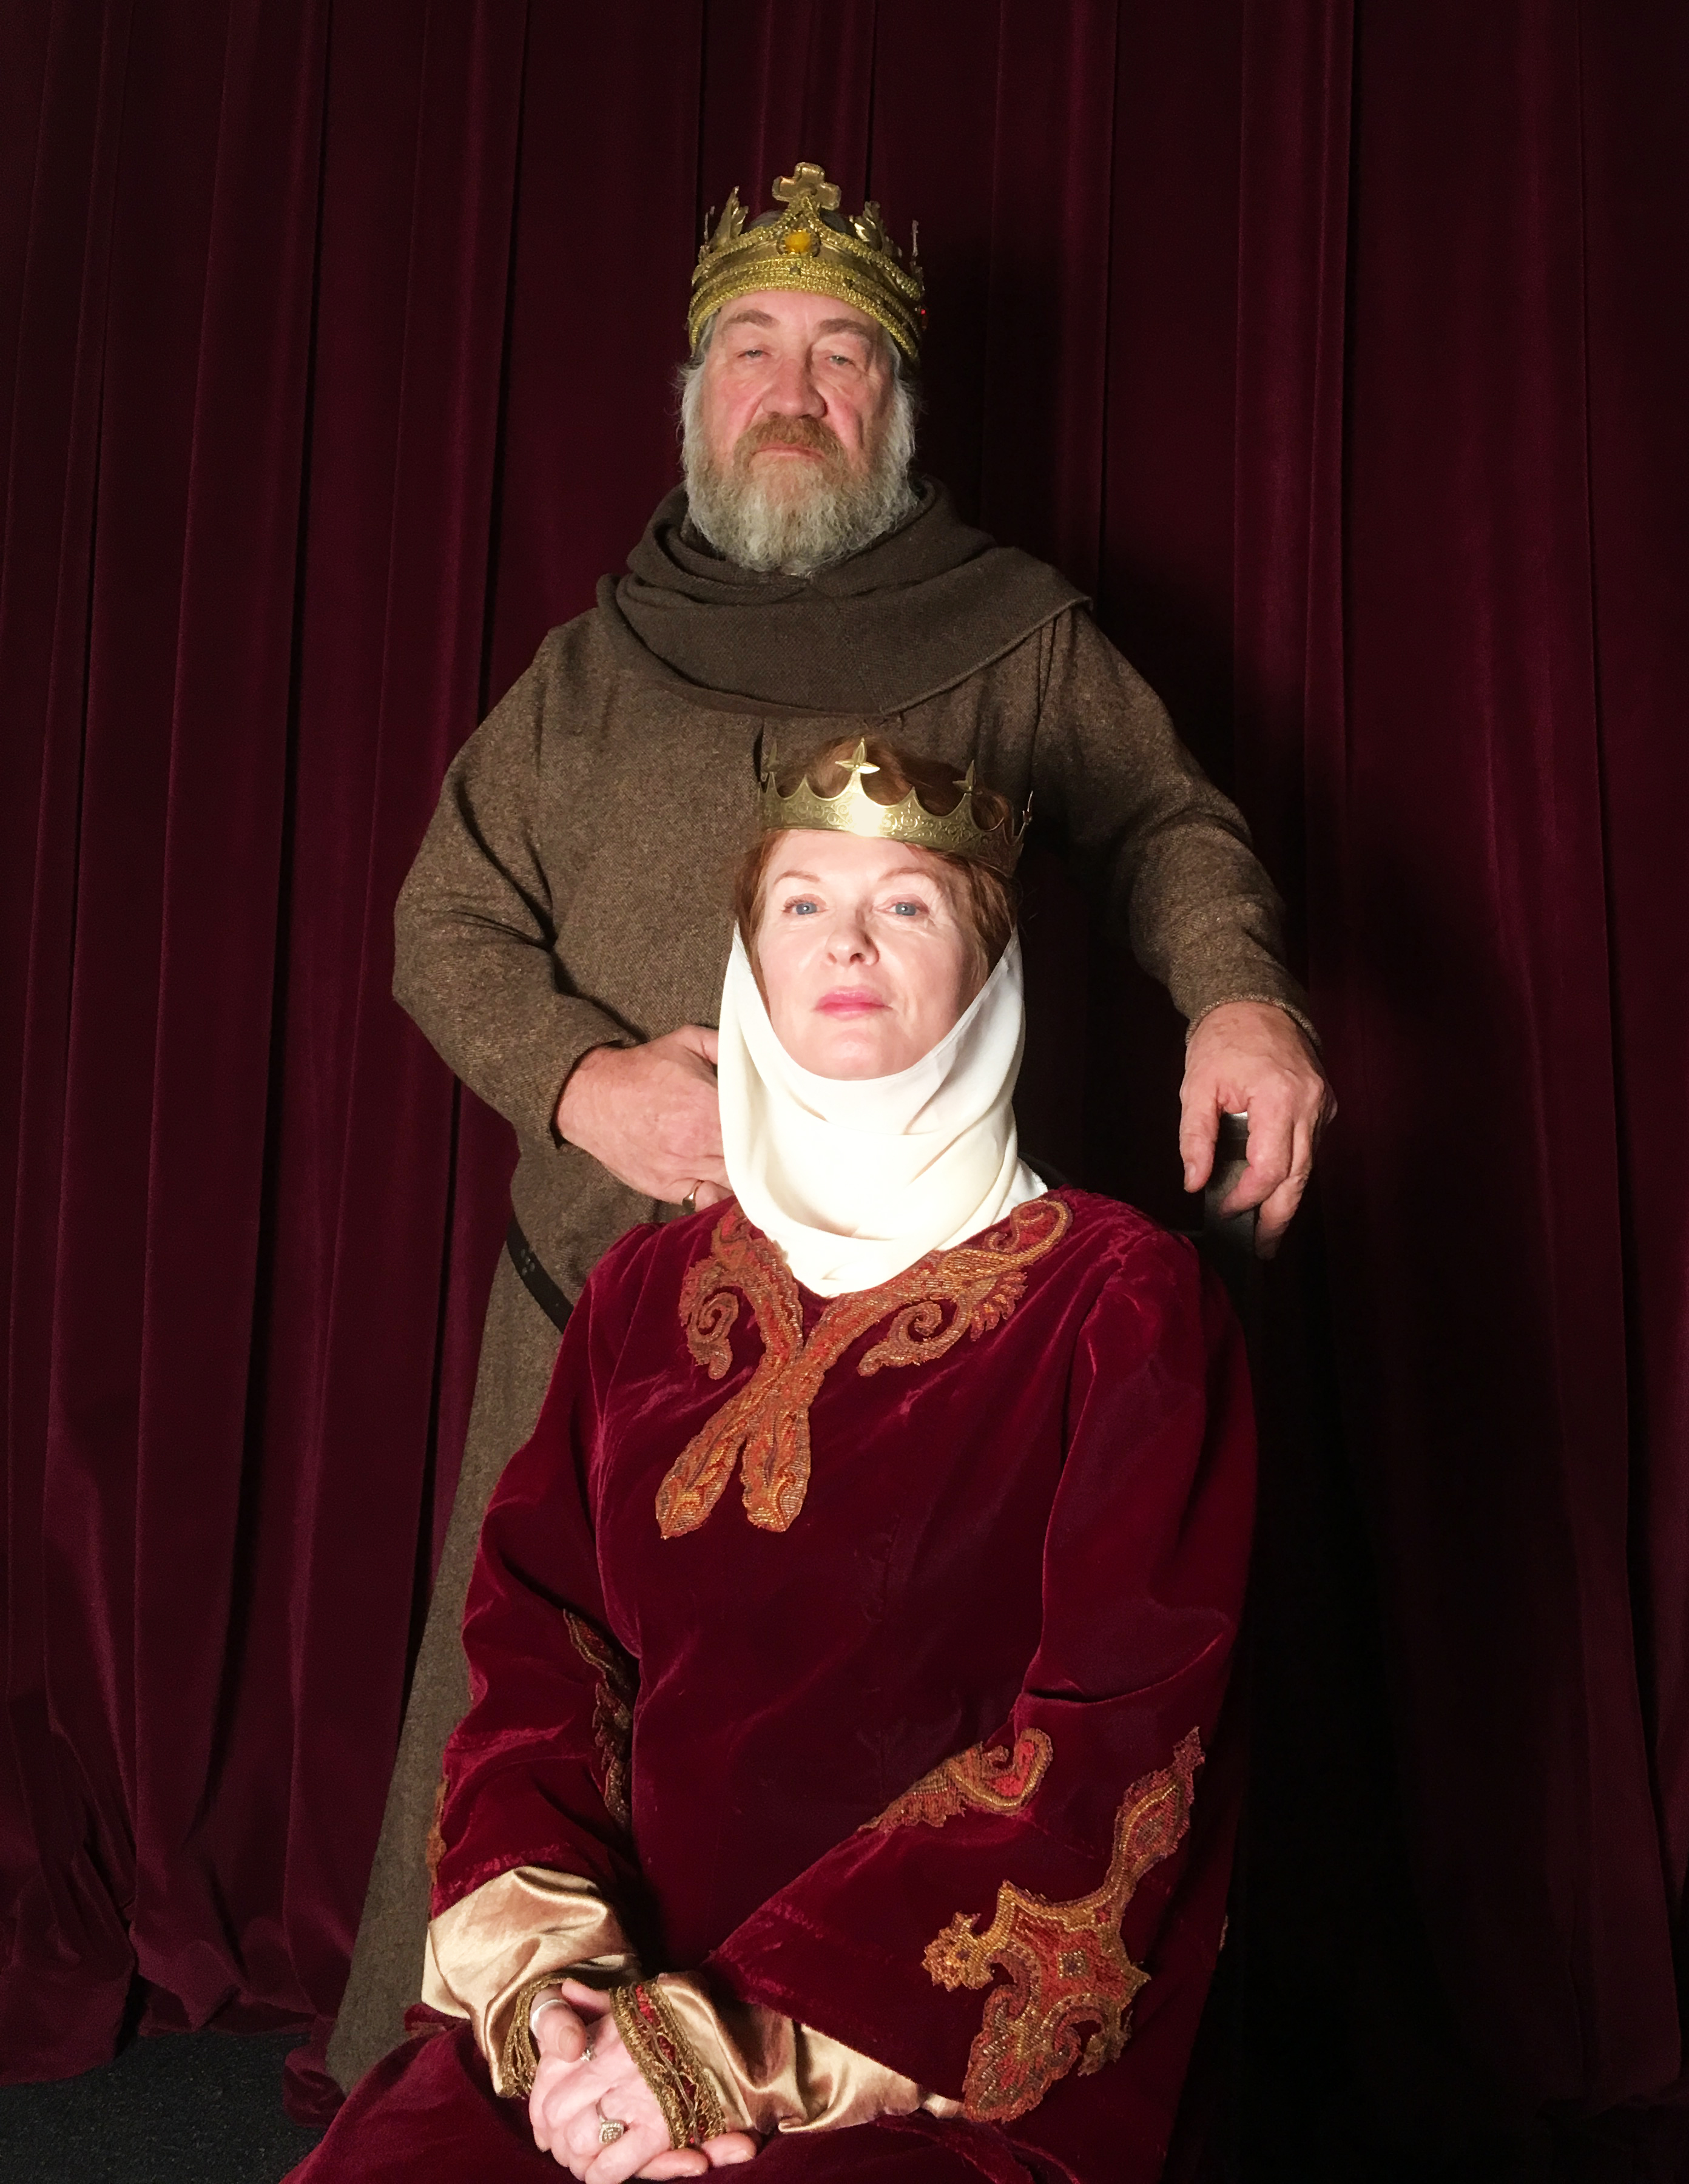 PICT's "Lion in Winter" has Alan Stanford and Cary Anne Spear as the royal odd couple Henry and Eleanor.